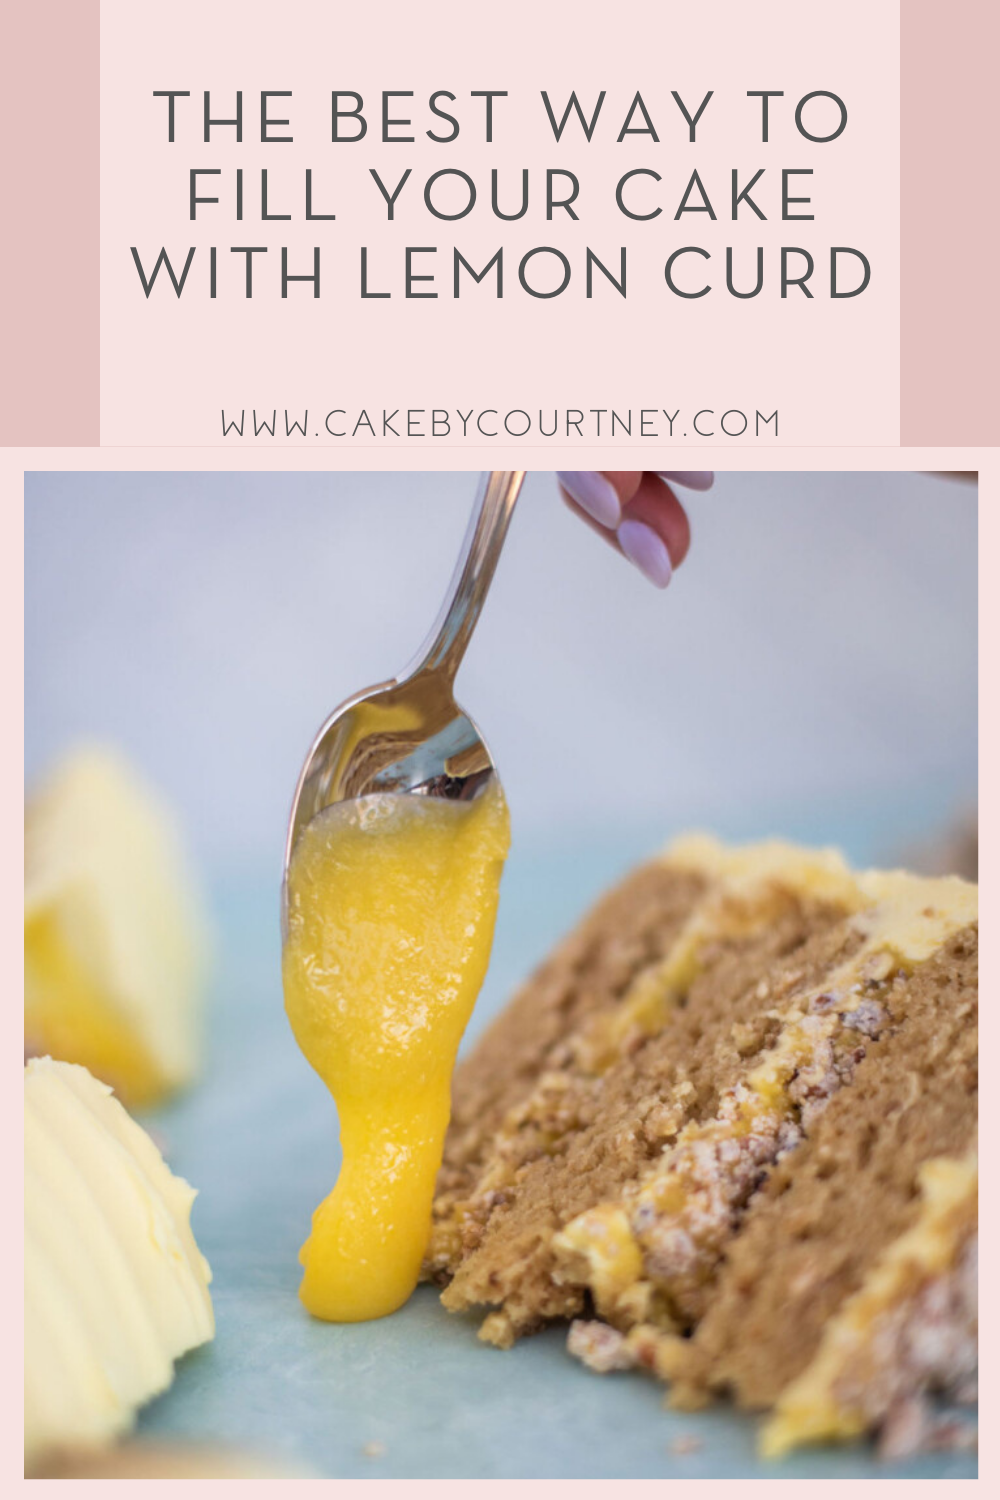 the best way to fill your cake with lemon curd. www.cakebycourtney.com